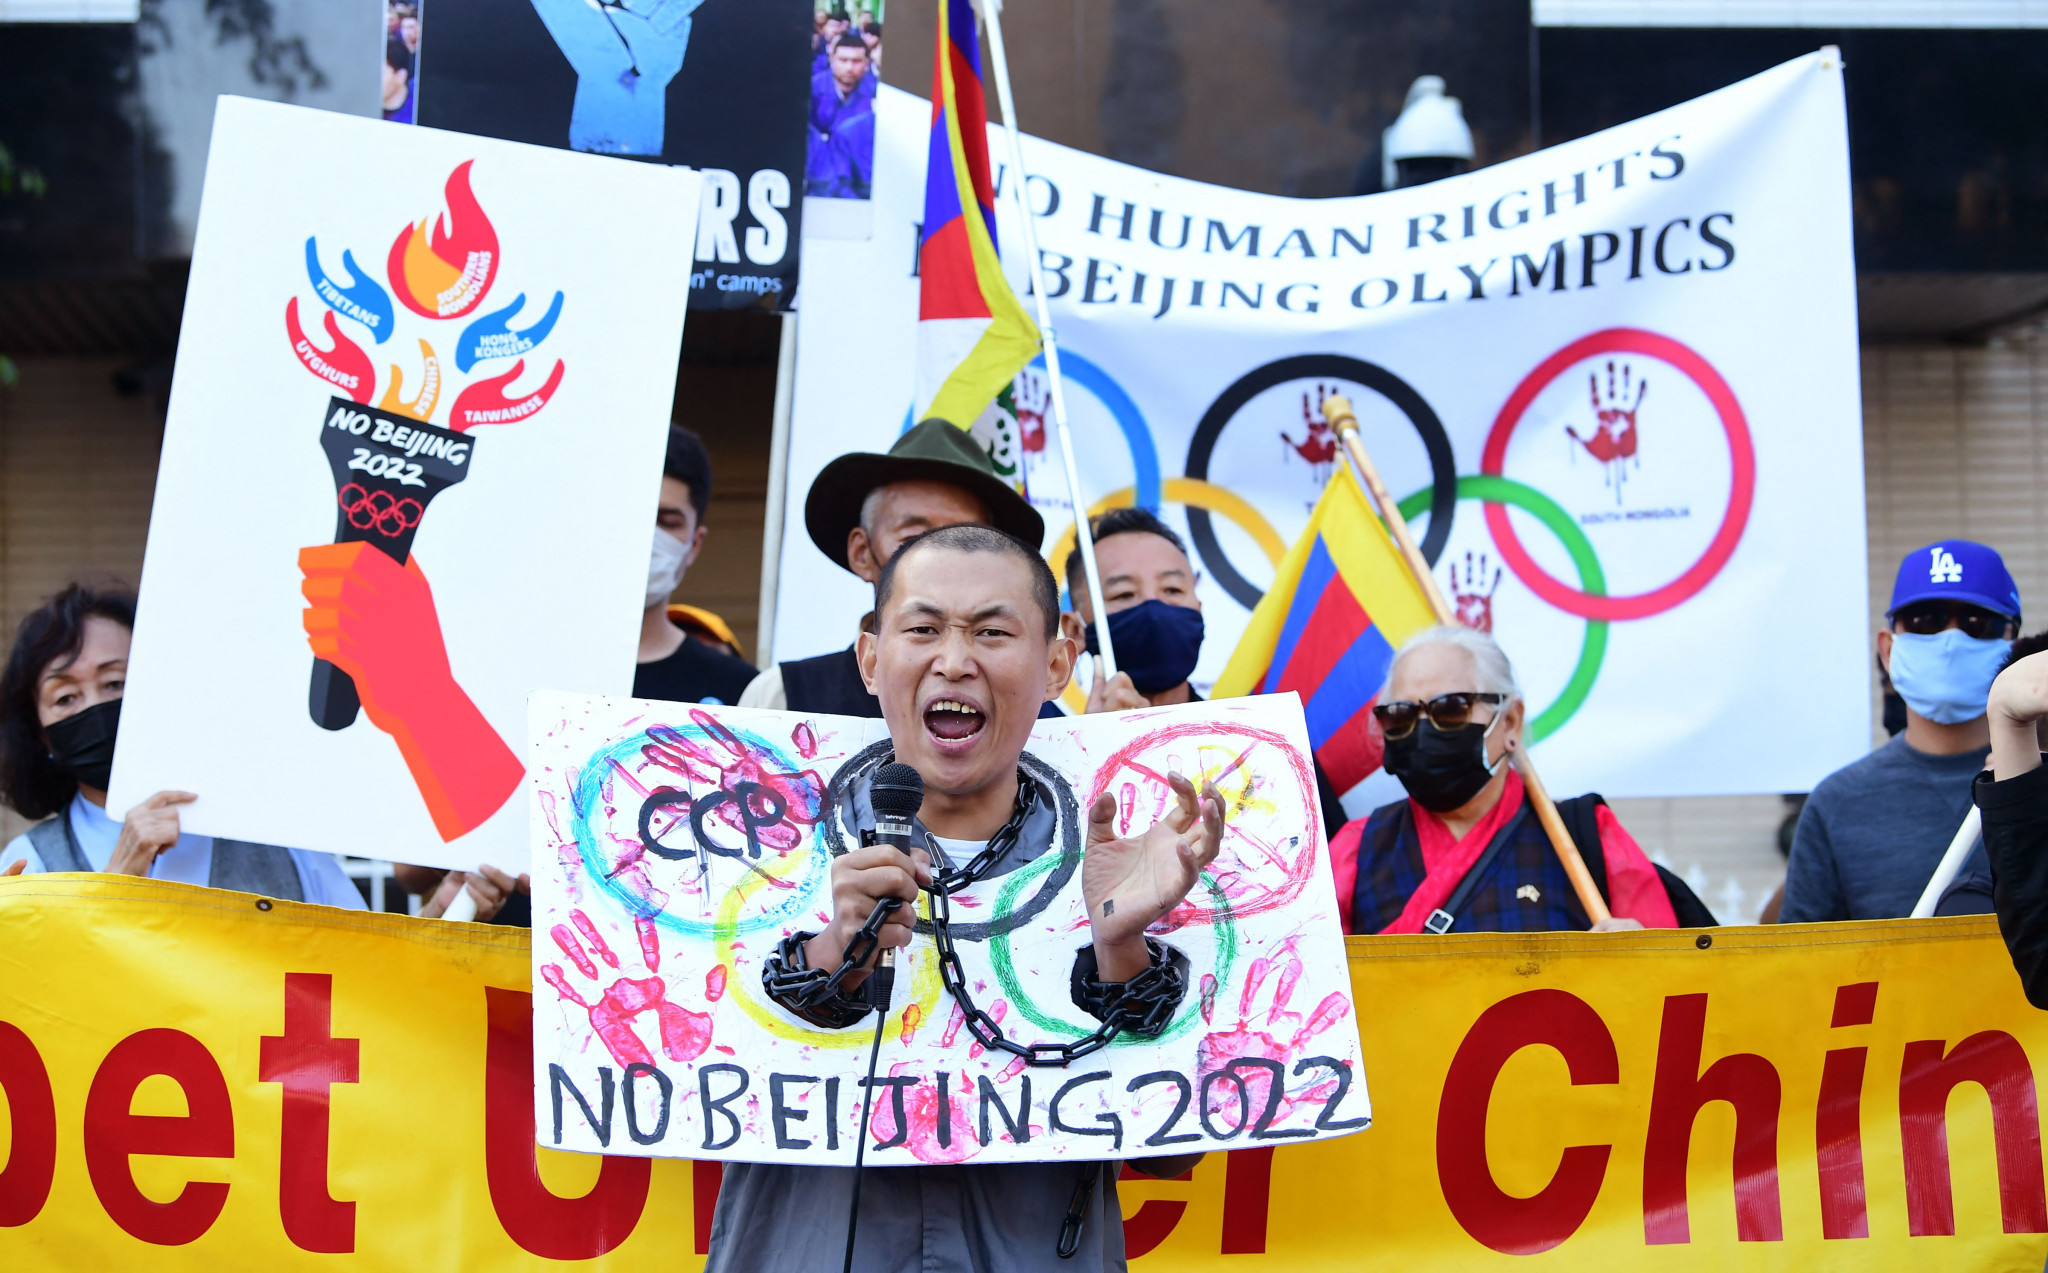 Several countries are set to boycott Beijing 2022 after concerns over China's human rights record ©Getty Images